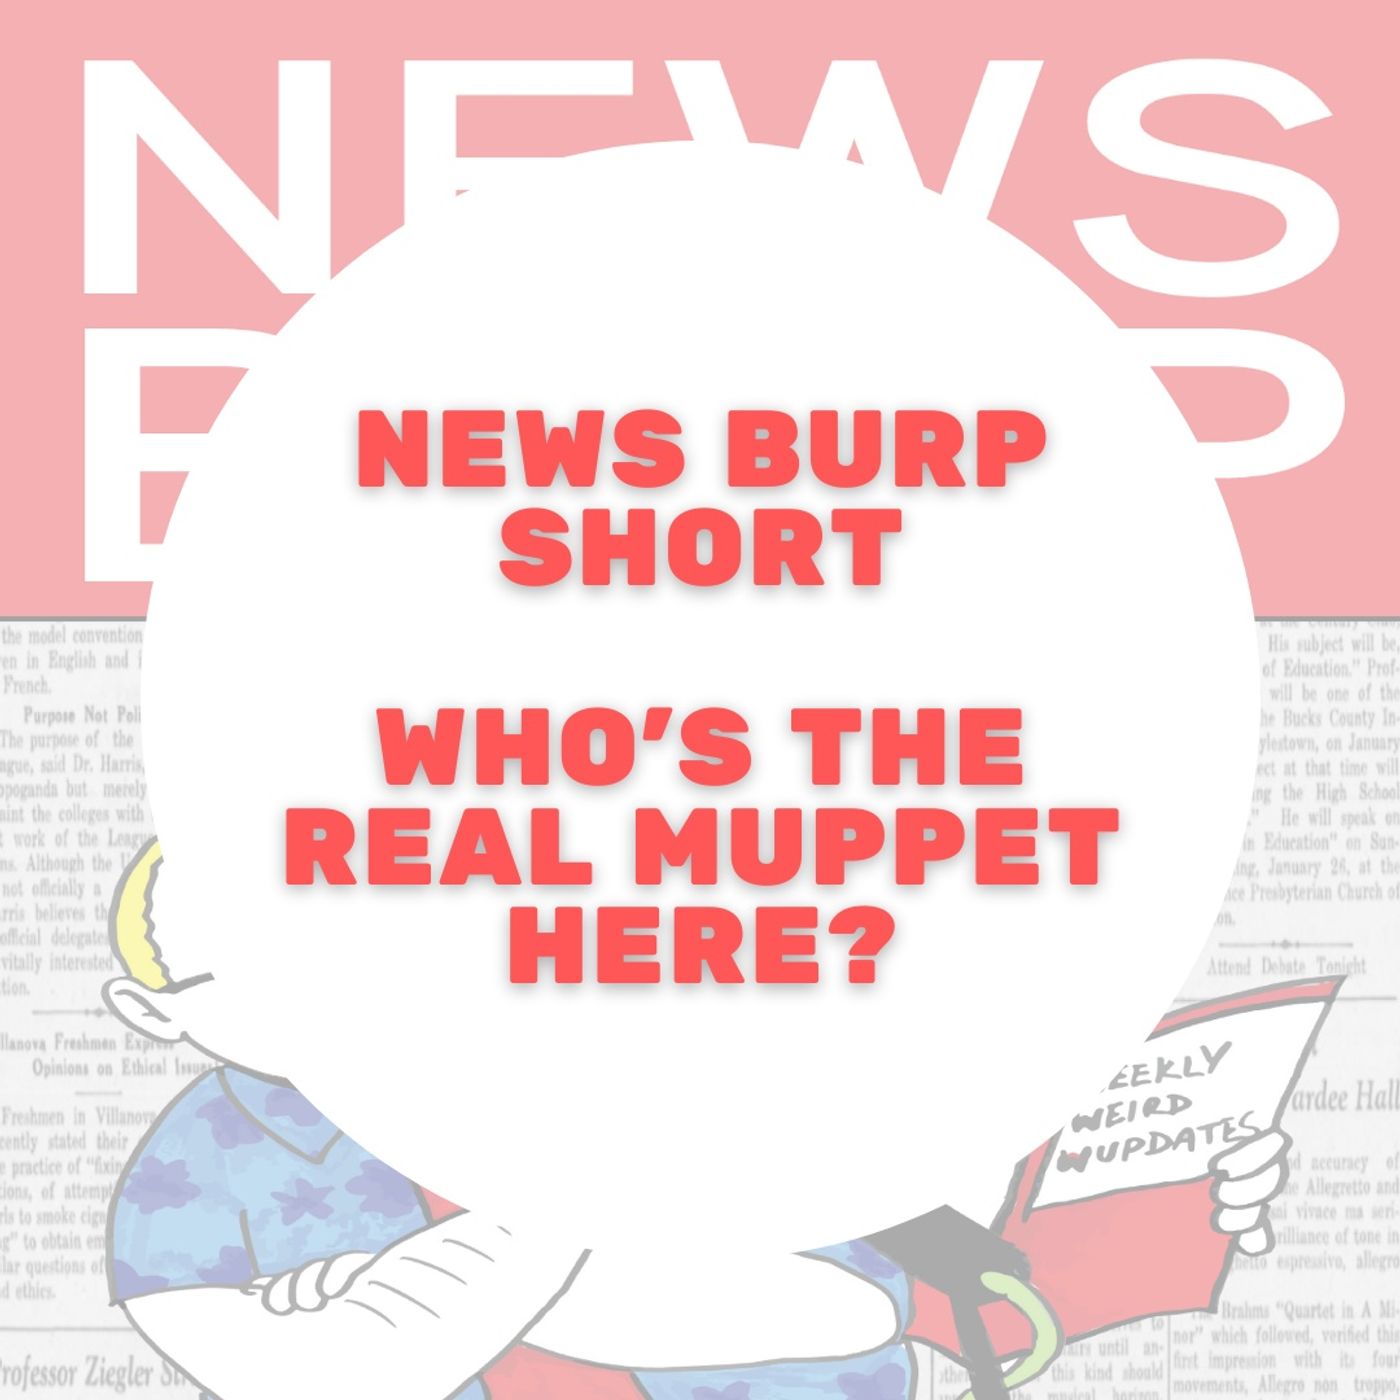 News Burp Short - Who’s the REAL Muppet here?